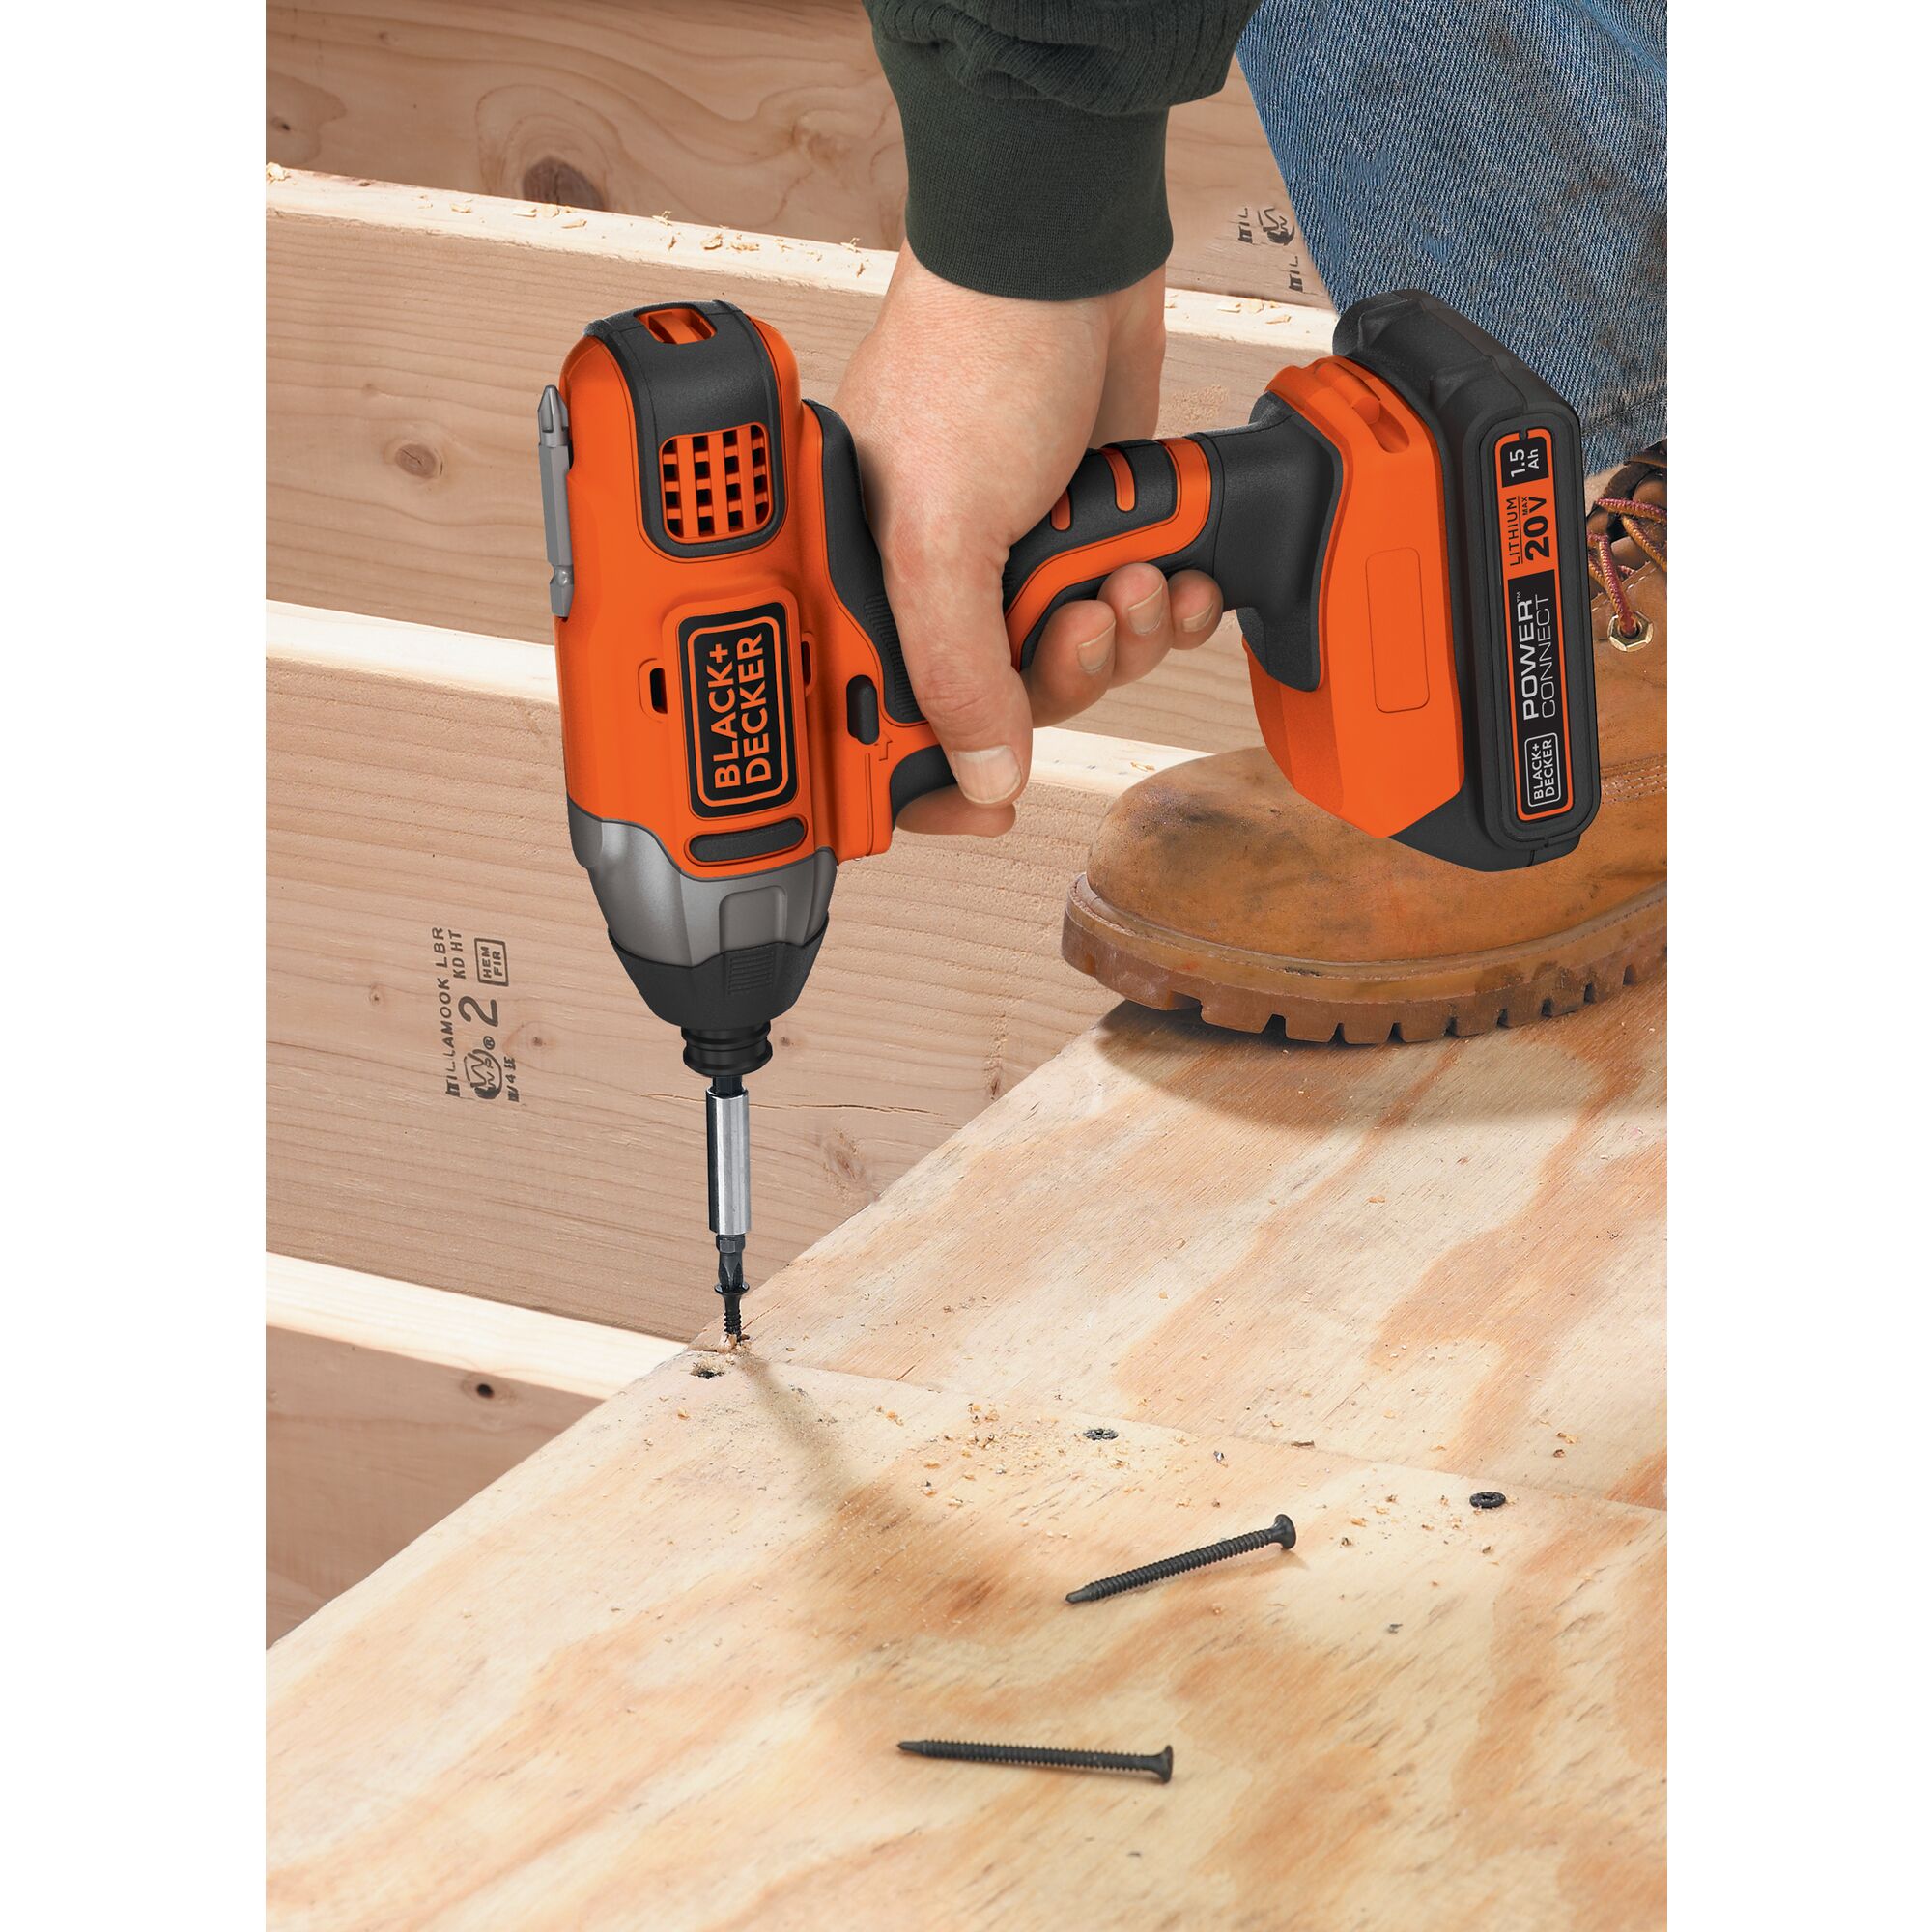 MAX Lithium Impact Driver being used to drive screw in wooden frame.